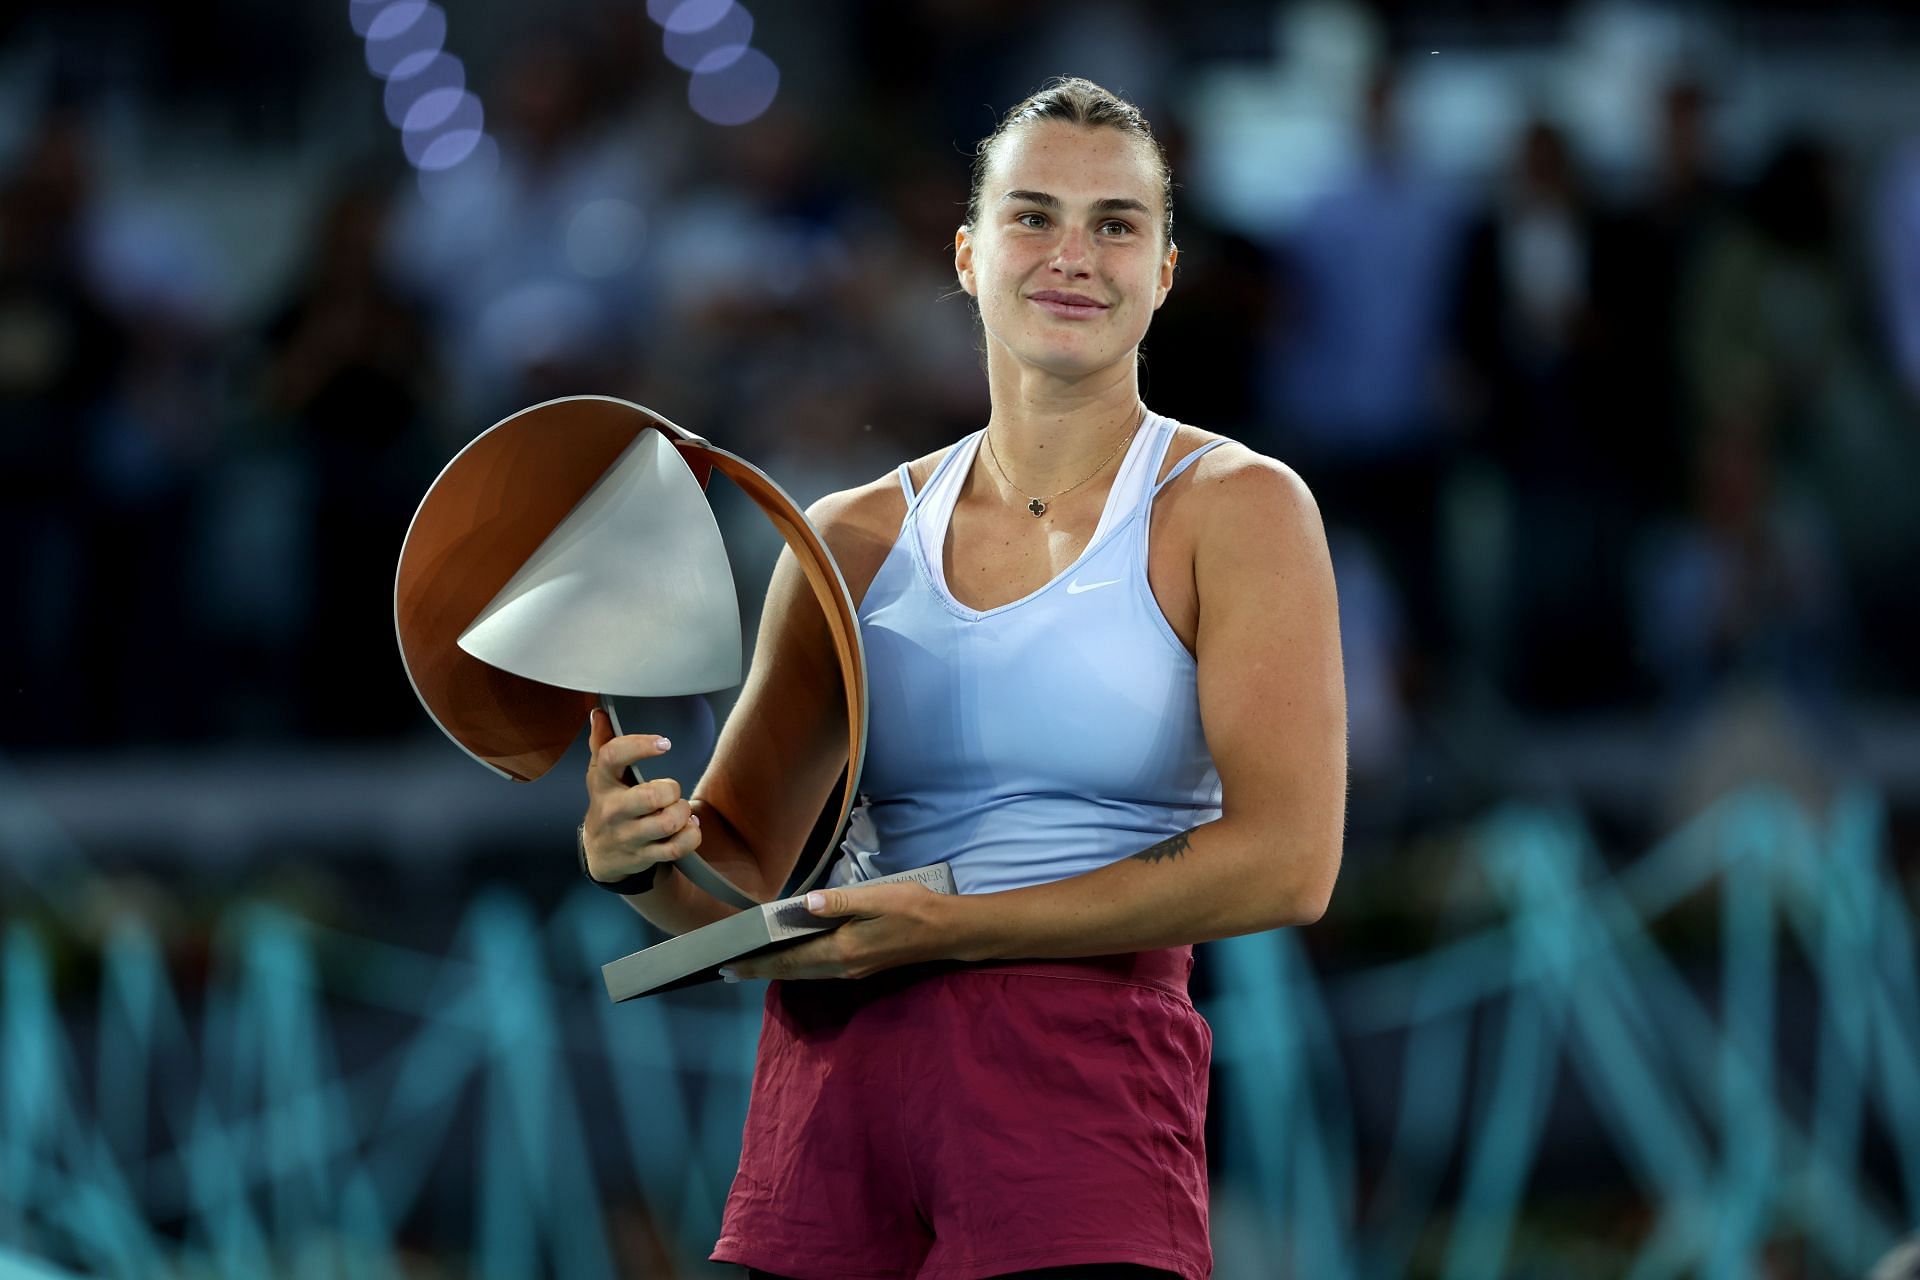 Aryna Sabalenka is the defending champion at the Madrid Open.